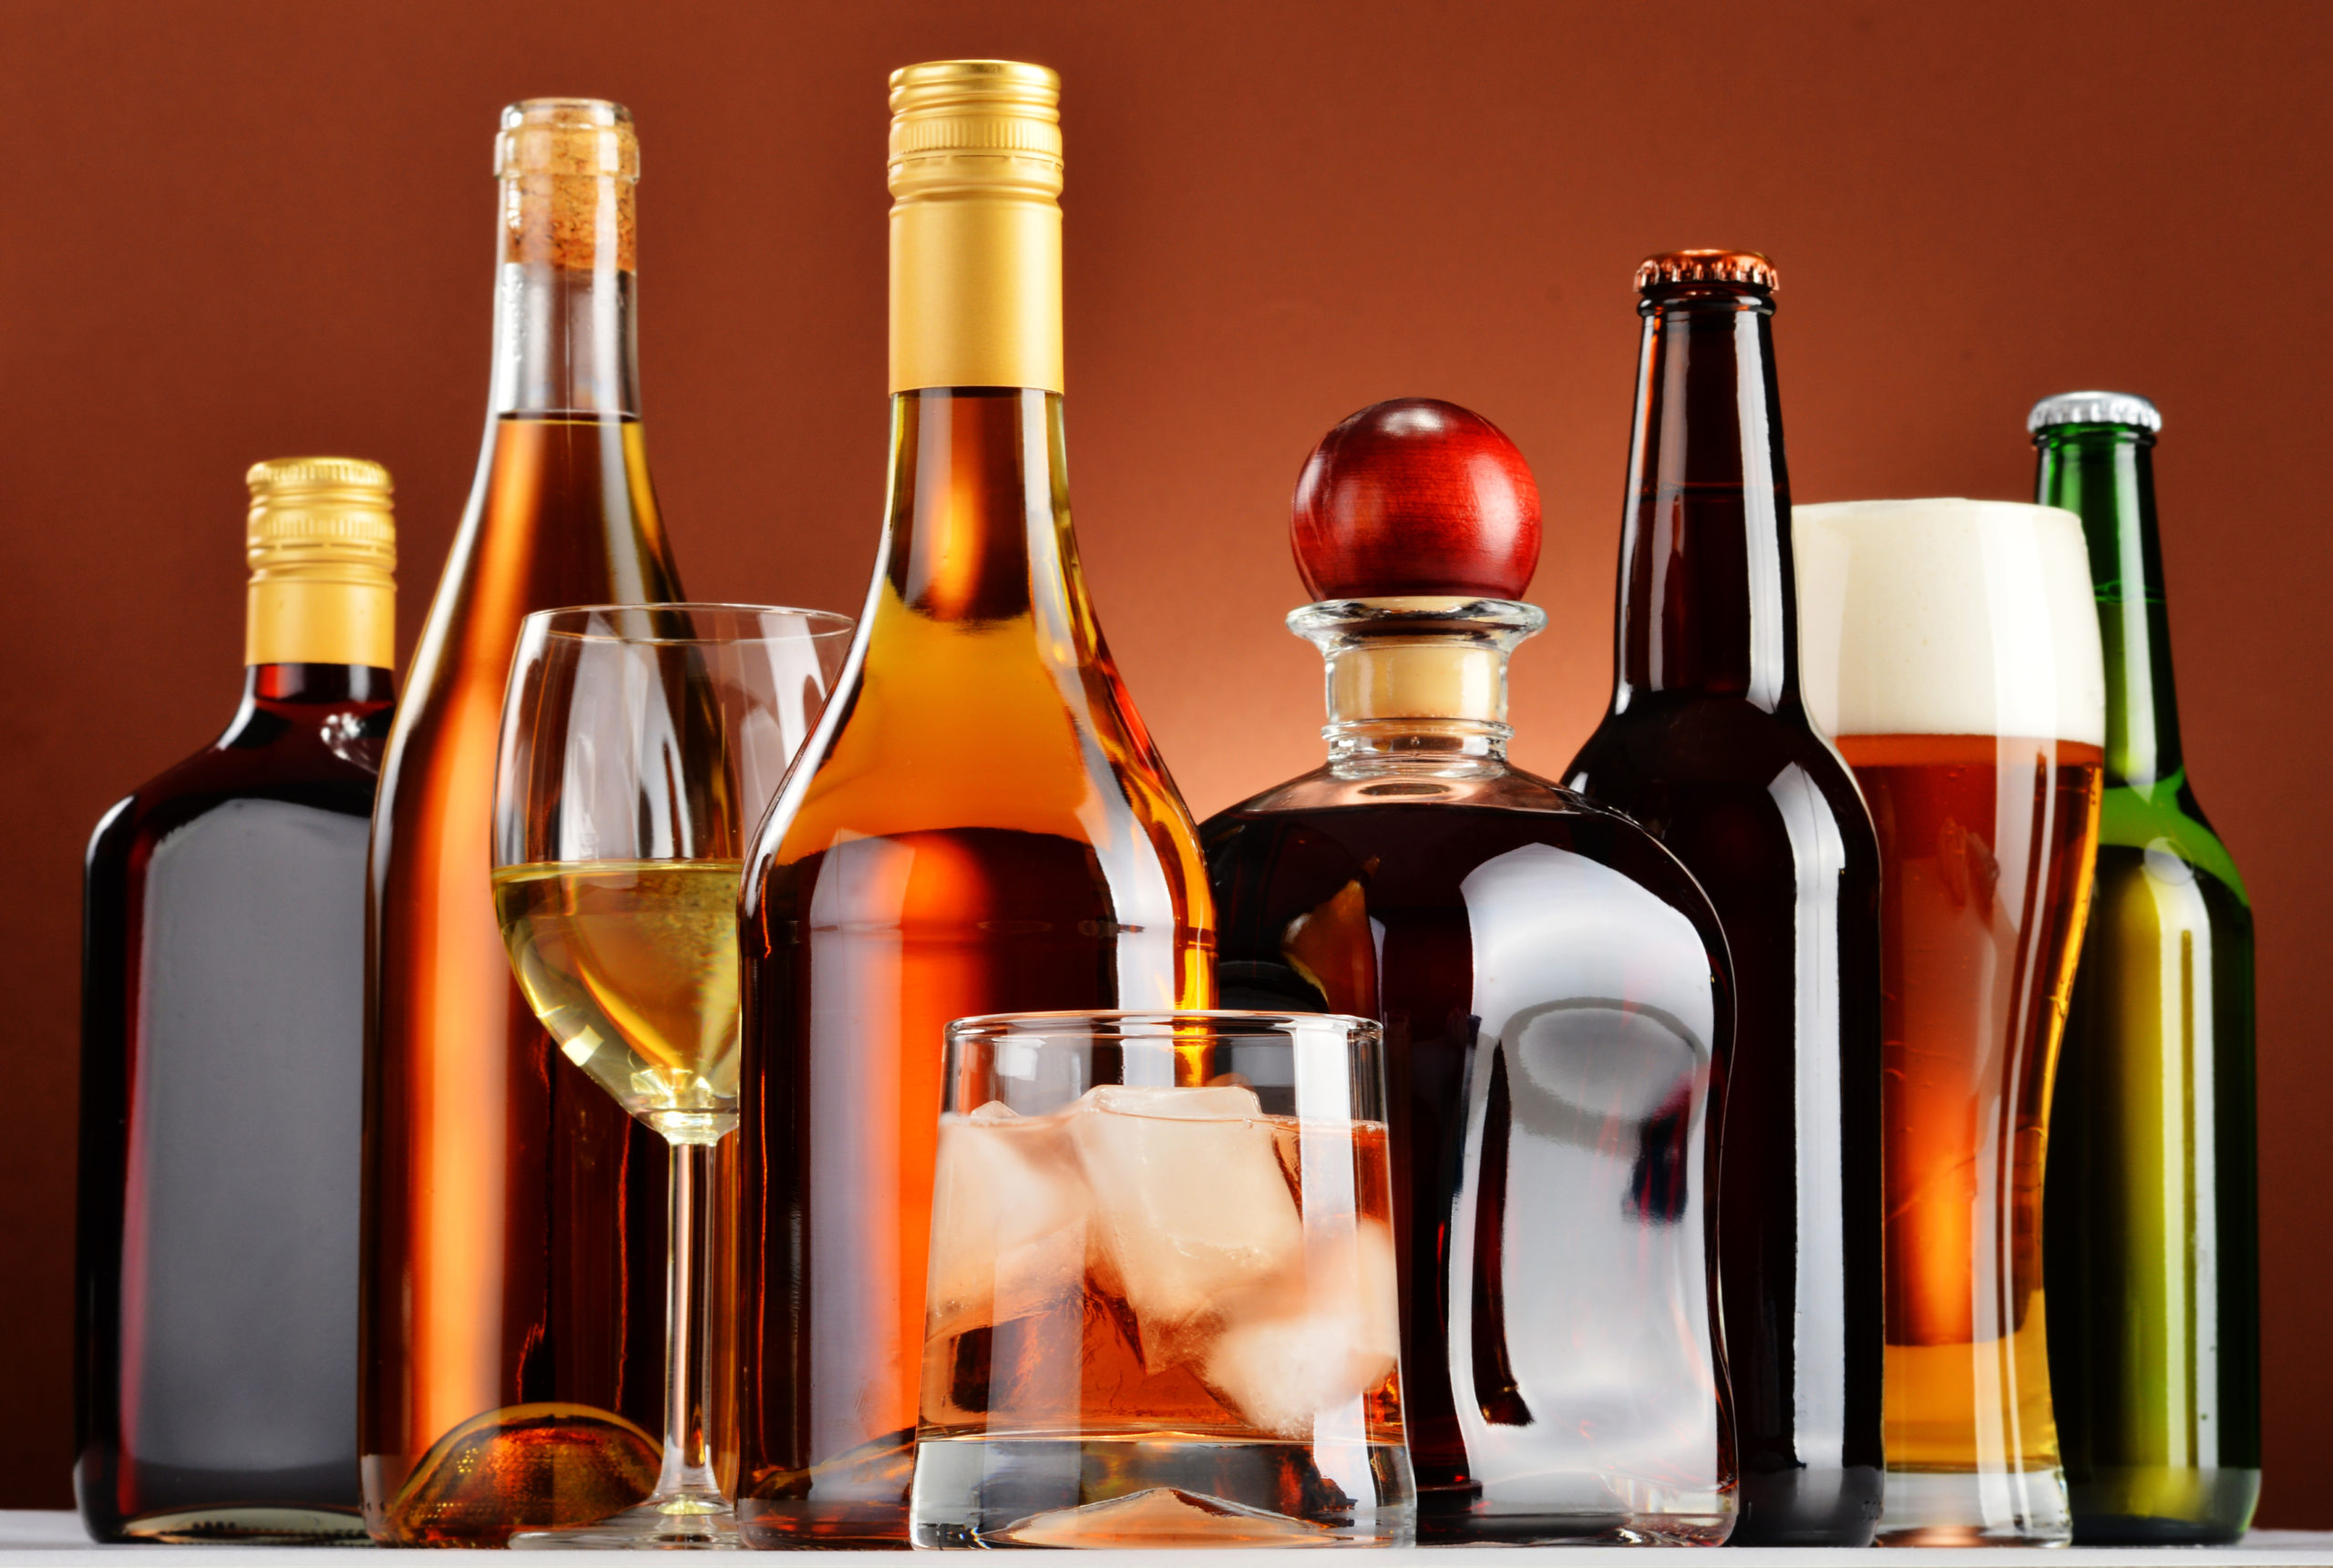 New Pennsylvania Liquor Code Changes (HB 1690) About Choices